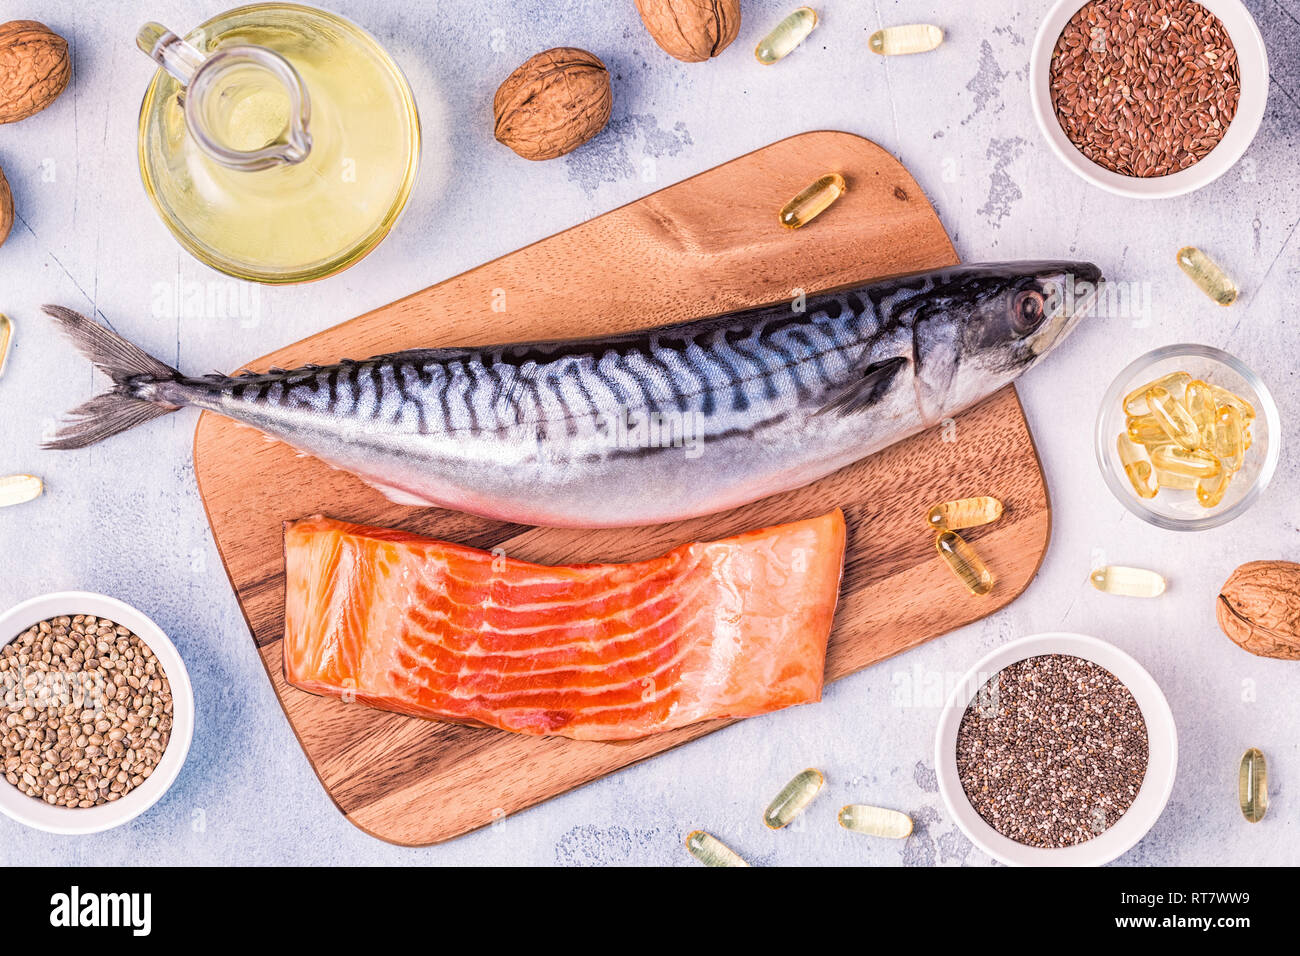 Sources of omega 3 - mackerel, salmon, flax seeds, hemp seeds, chia, walnuts, flaxseed oil. Healthy eating concept. Top view with copy space. Stock Photo